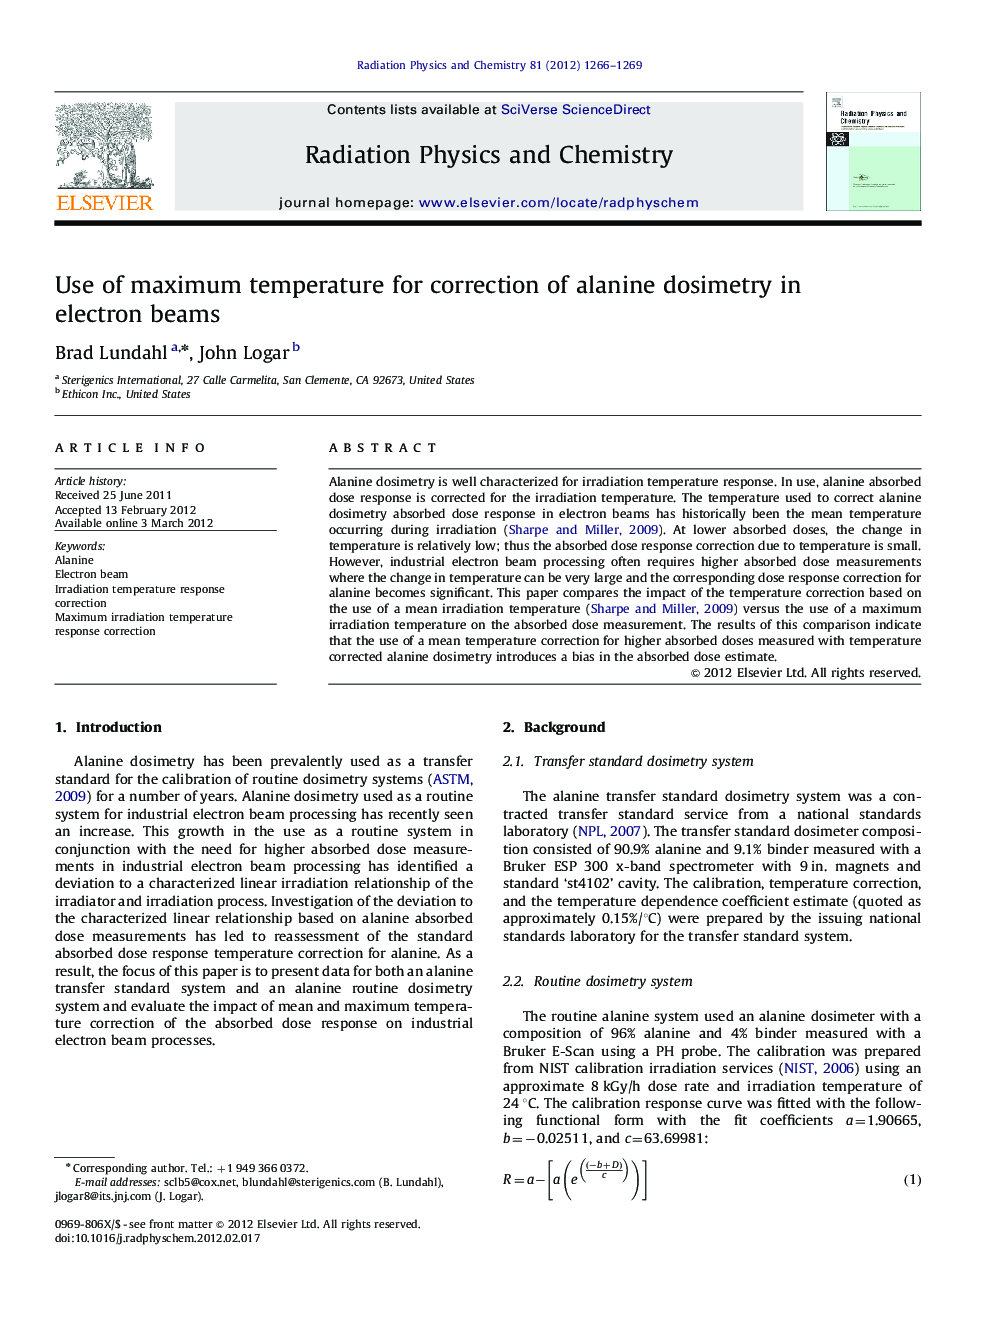 Use of maximum temperature for correction of alanine dosimetry in electron beams